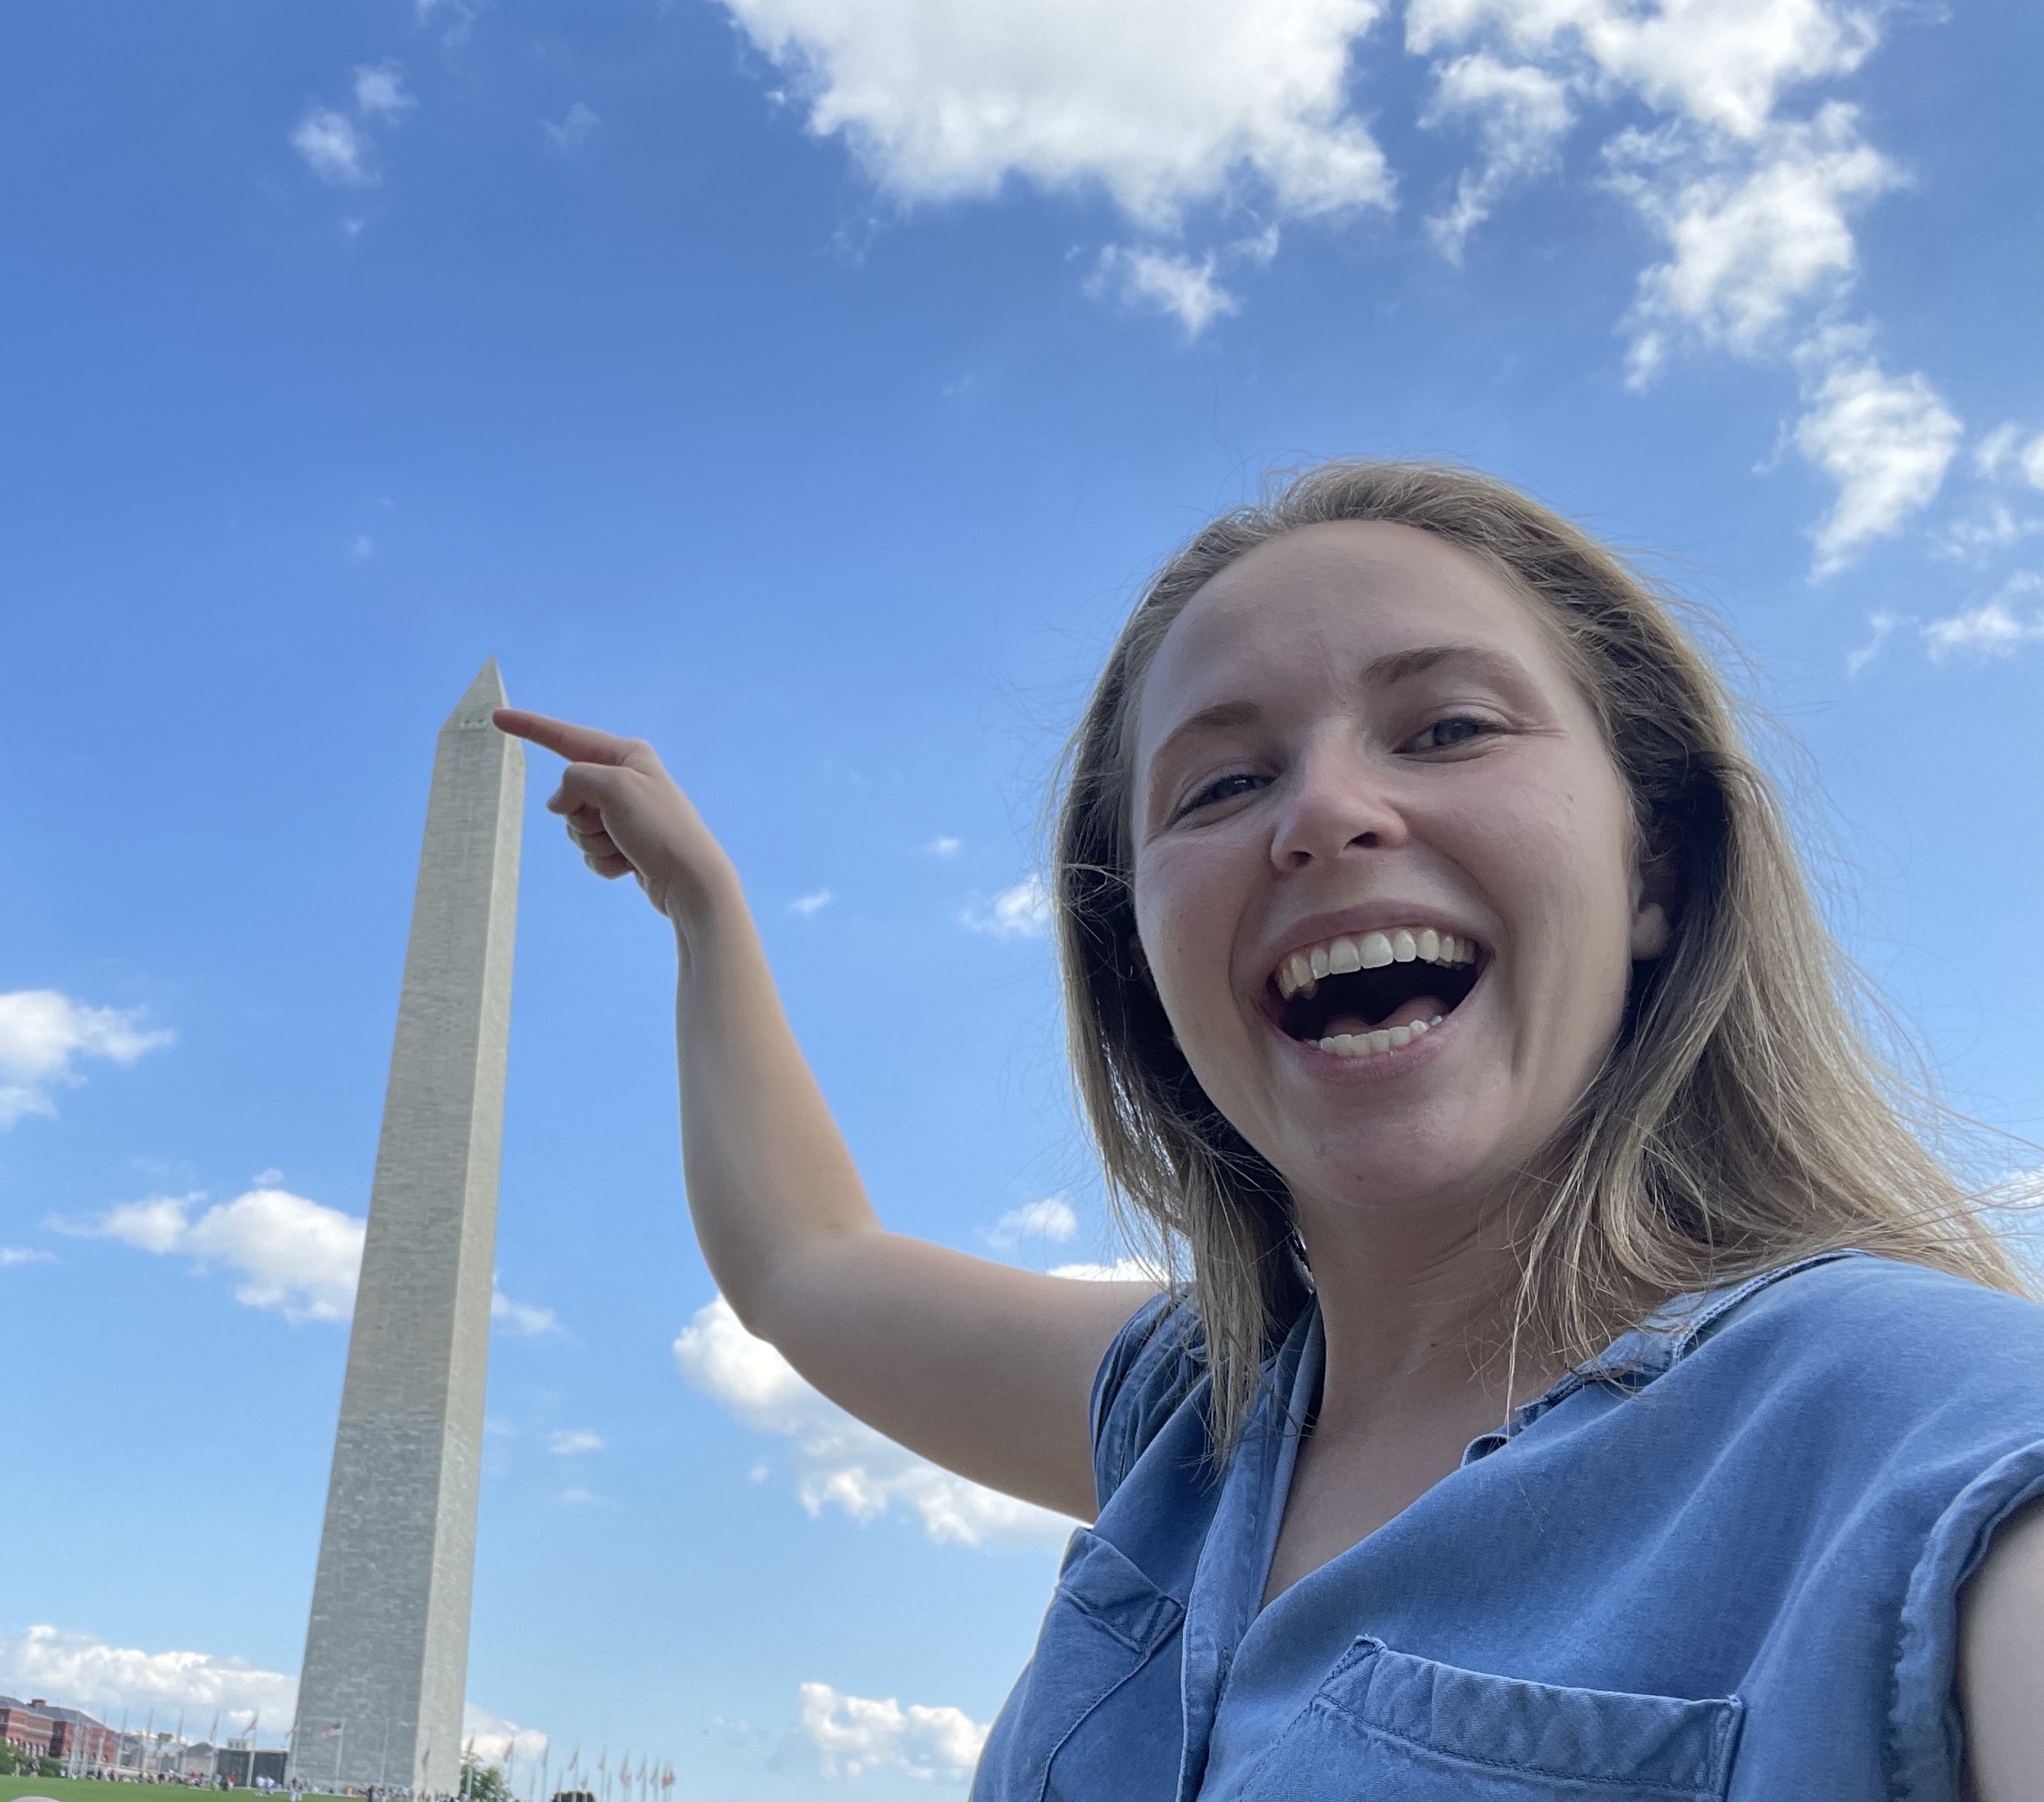 Smiling LBJ student pictured in front of the Washington Monument with blue sky background